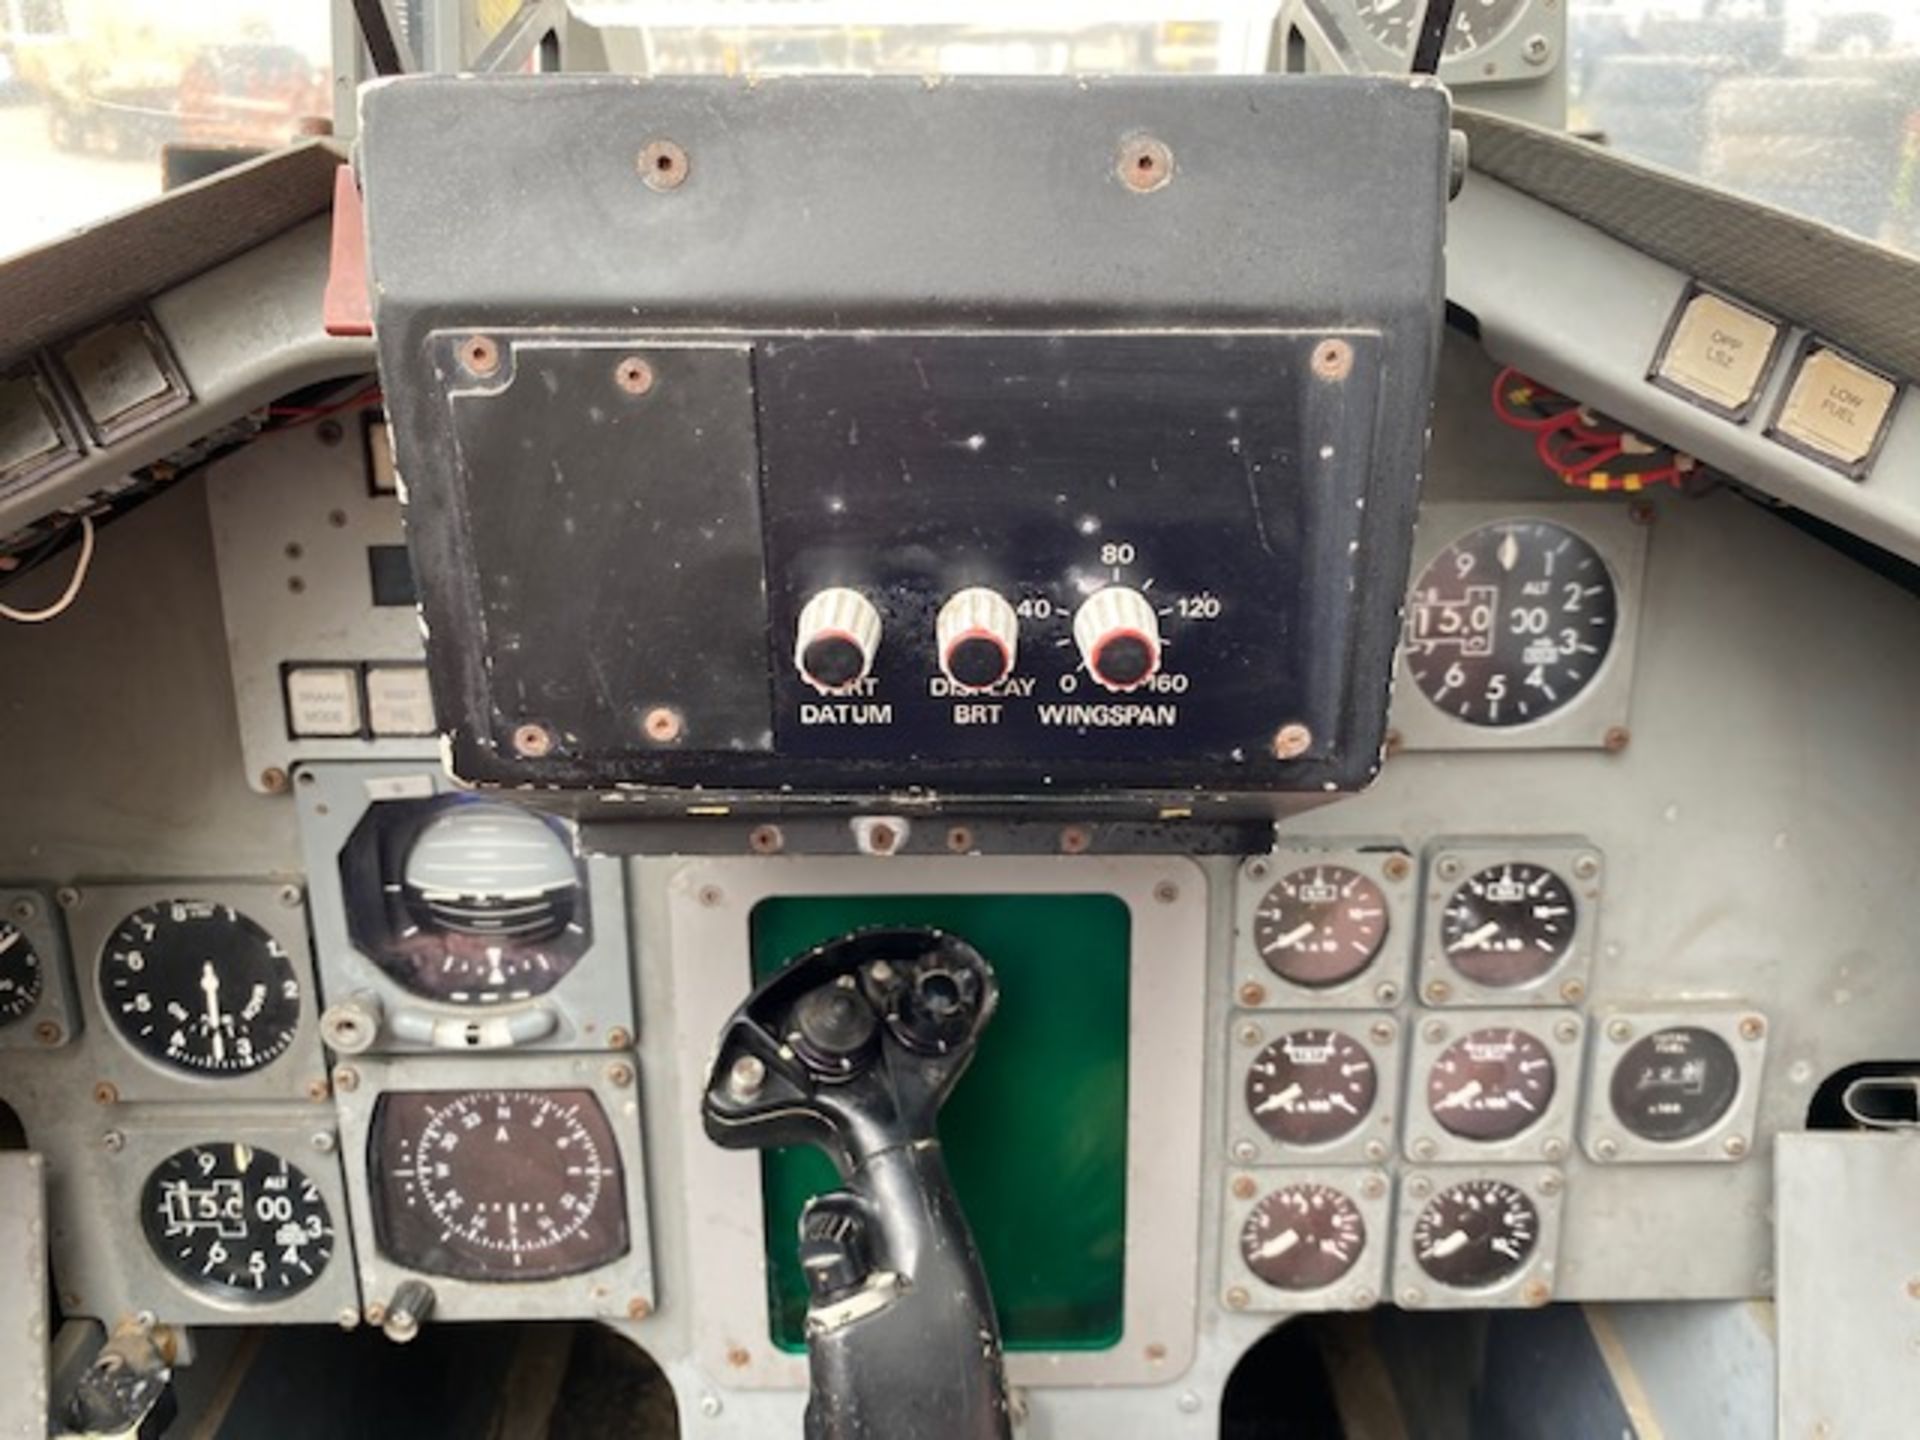 Panavia Tornado Cockpit Simulator C/W Instruments, Controls, Martin Baker Ejection Seat etc From RAF - Image 23 of 36